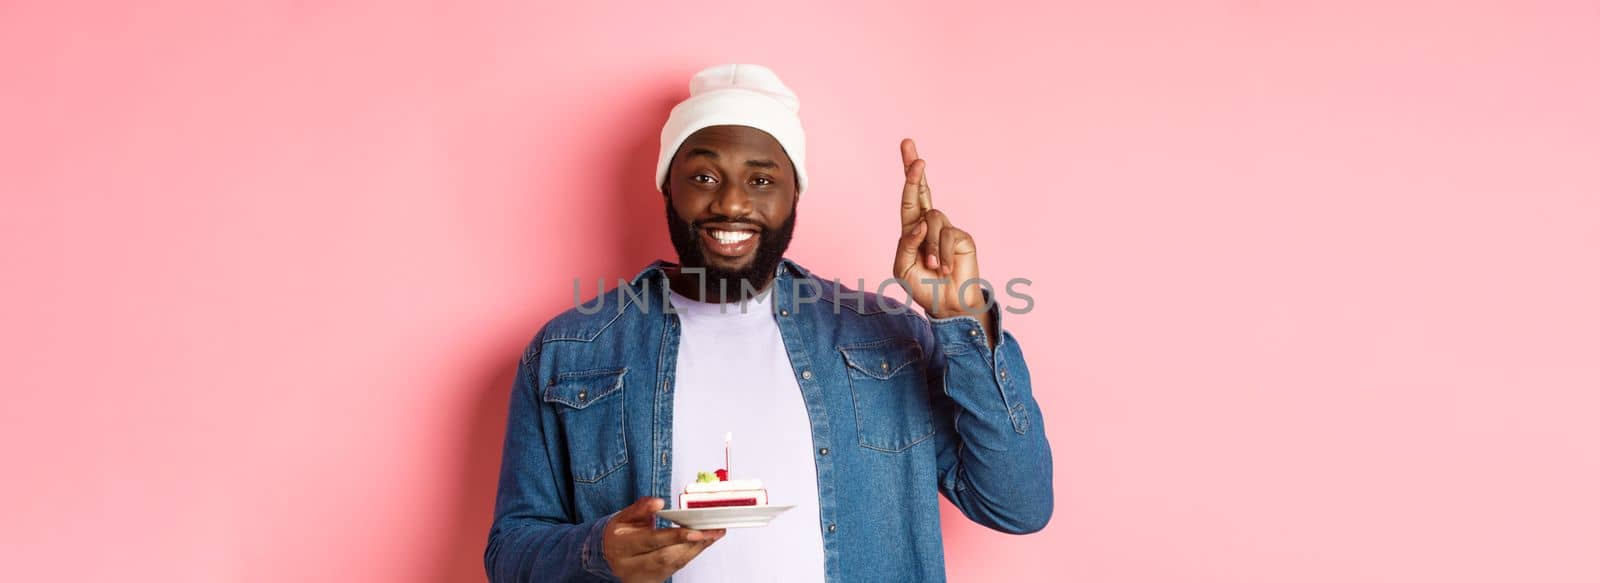 Handsome african-american guy celebrating birthday, making wish with fingers crossed, holding bday cake with candle, standing against pink background by Benzoix